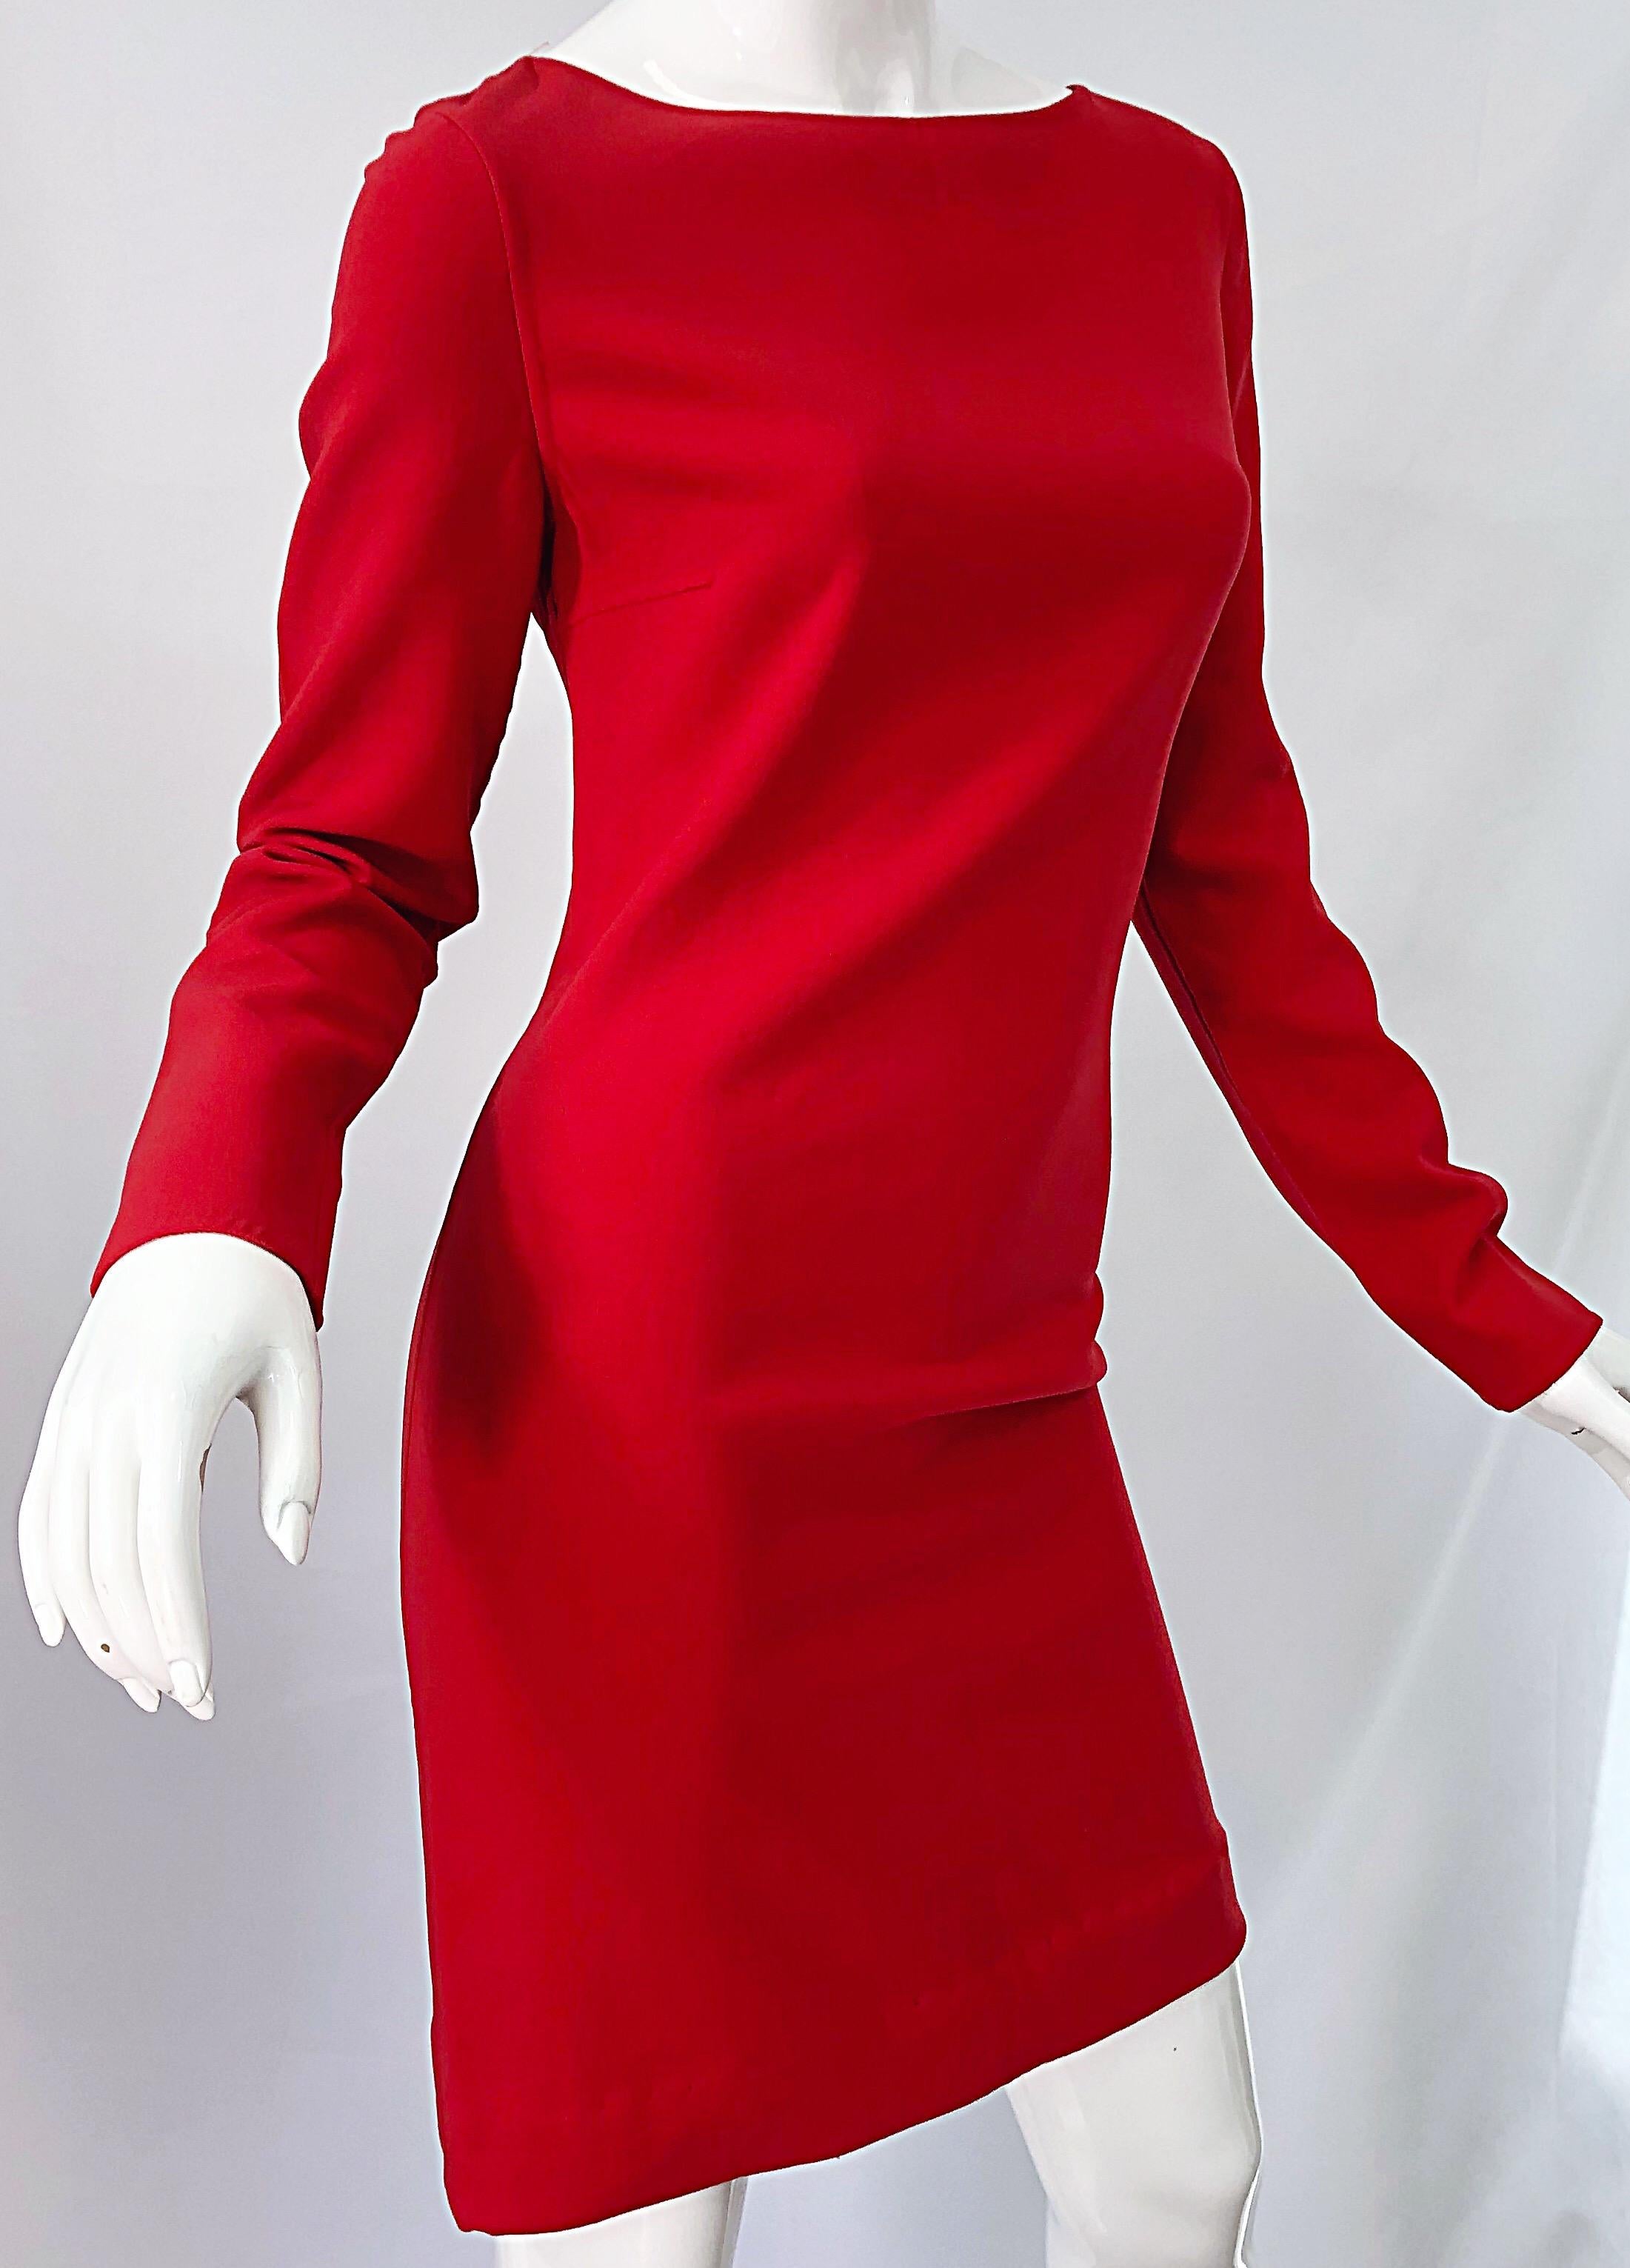 Michael Kors Collection Size 10 Early 2000s Lipstick Red Long Sleeve Dress In Excellent Condition For Sale In San Diego, CA